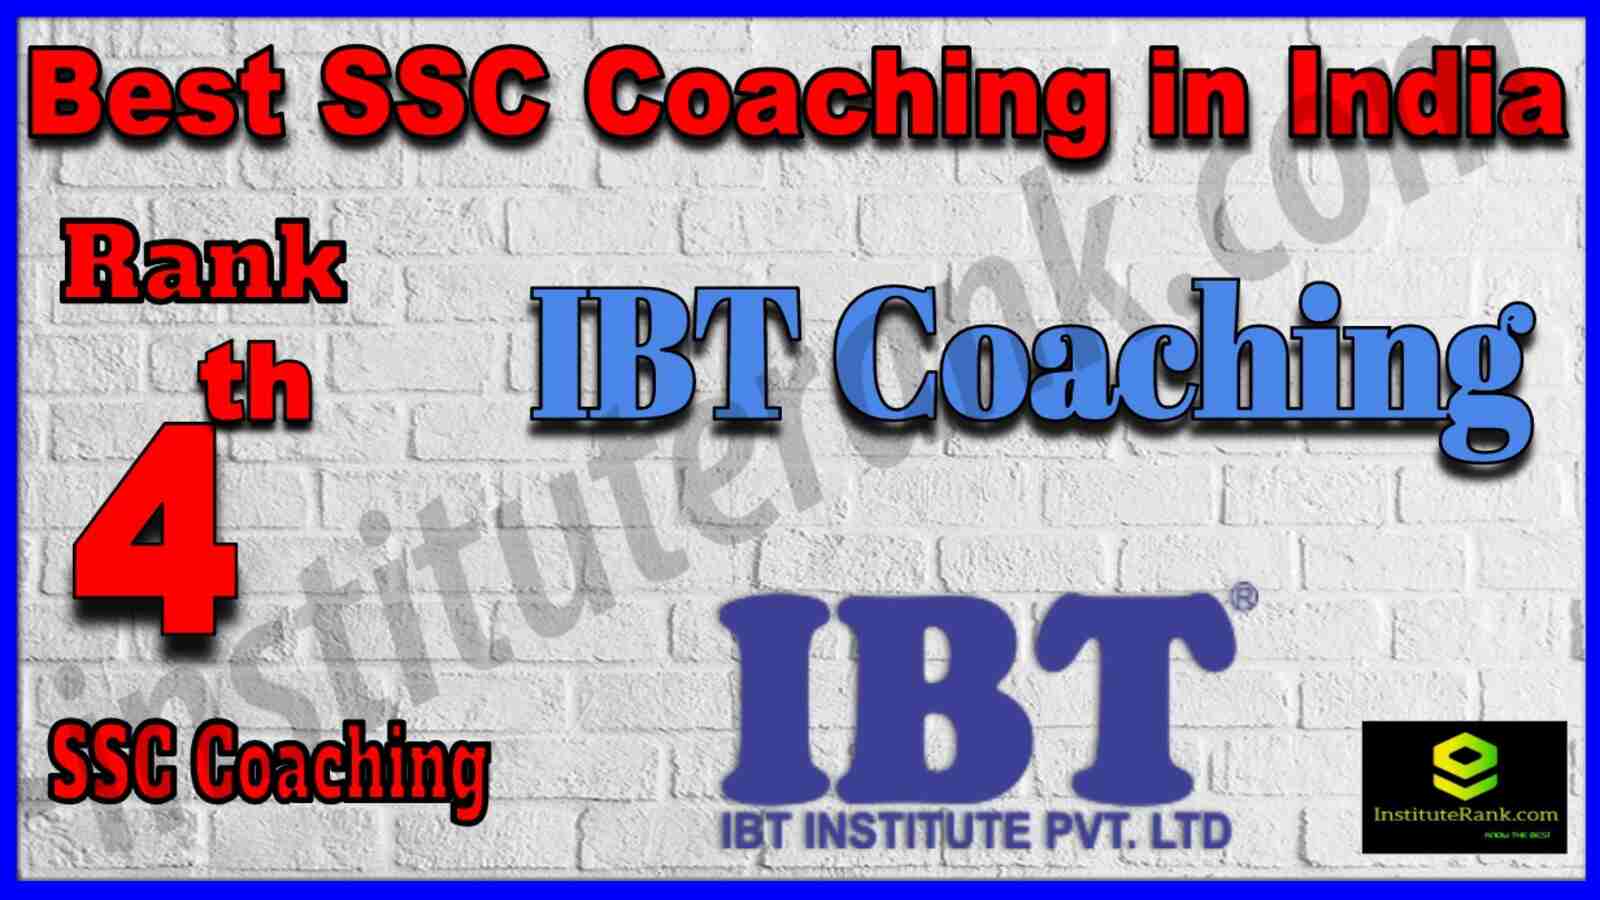 Rank 4 Best SSC Coaching in India